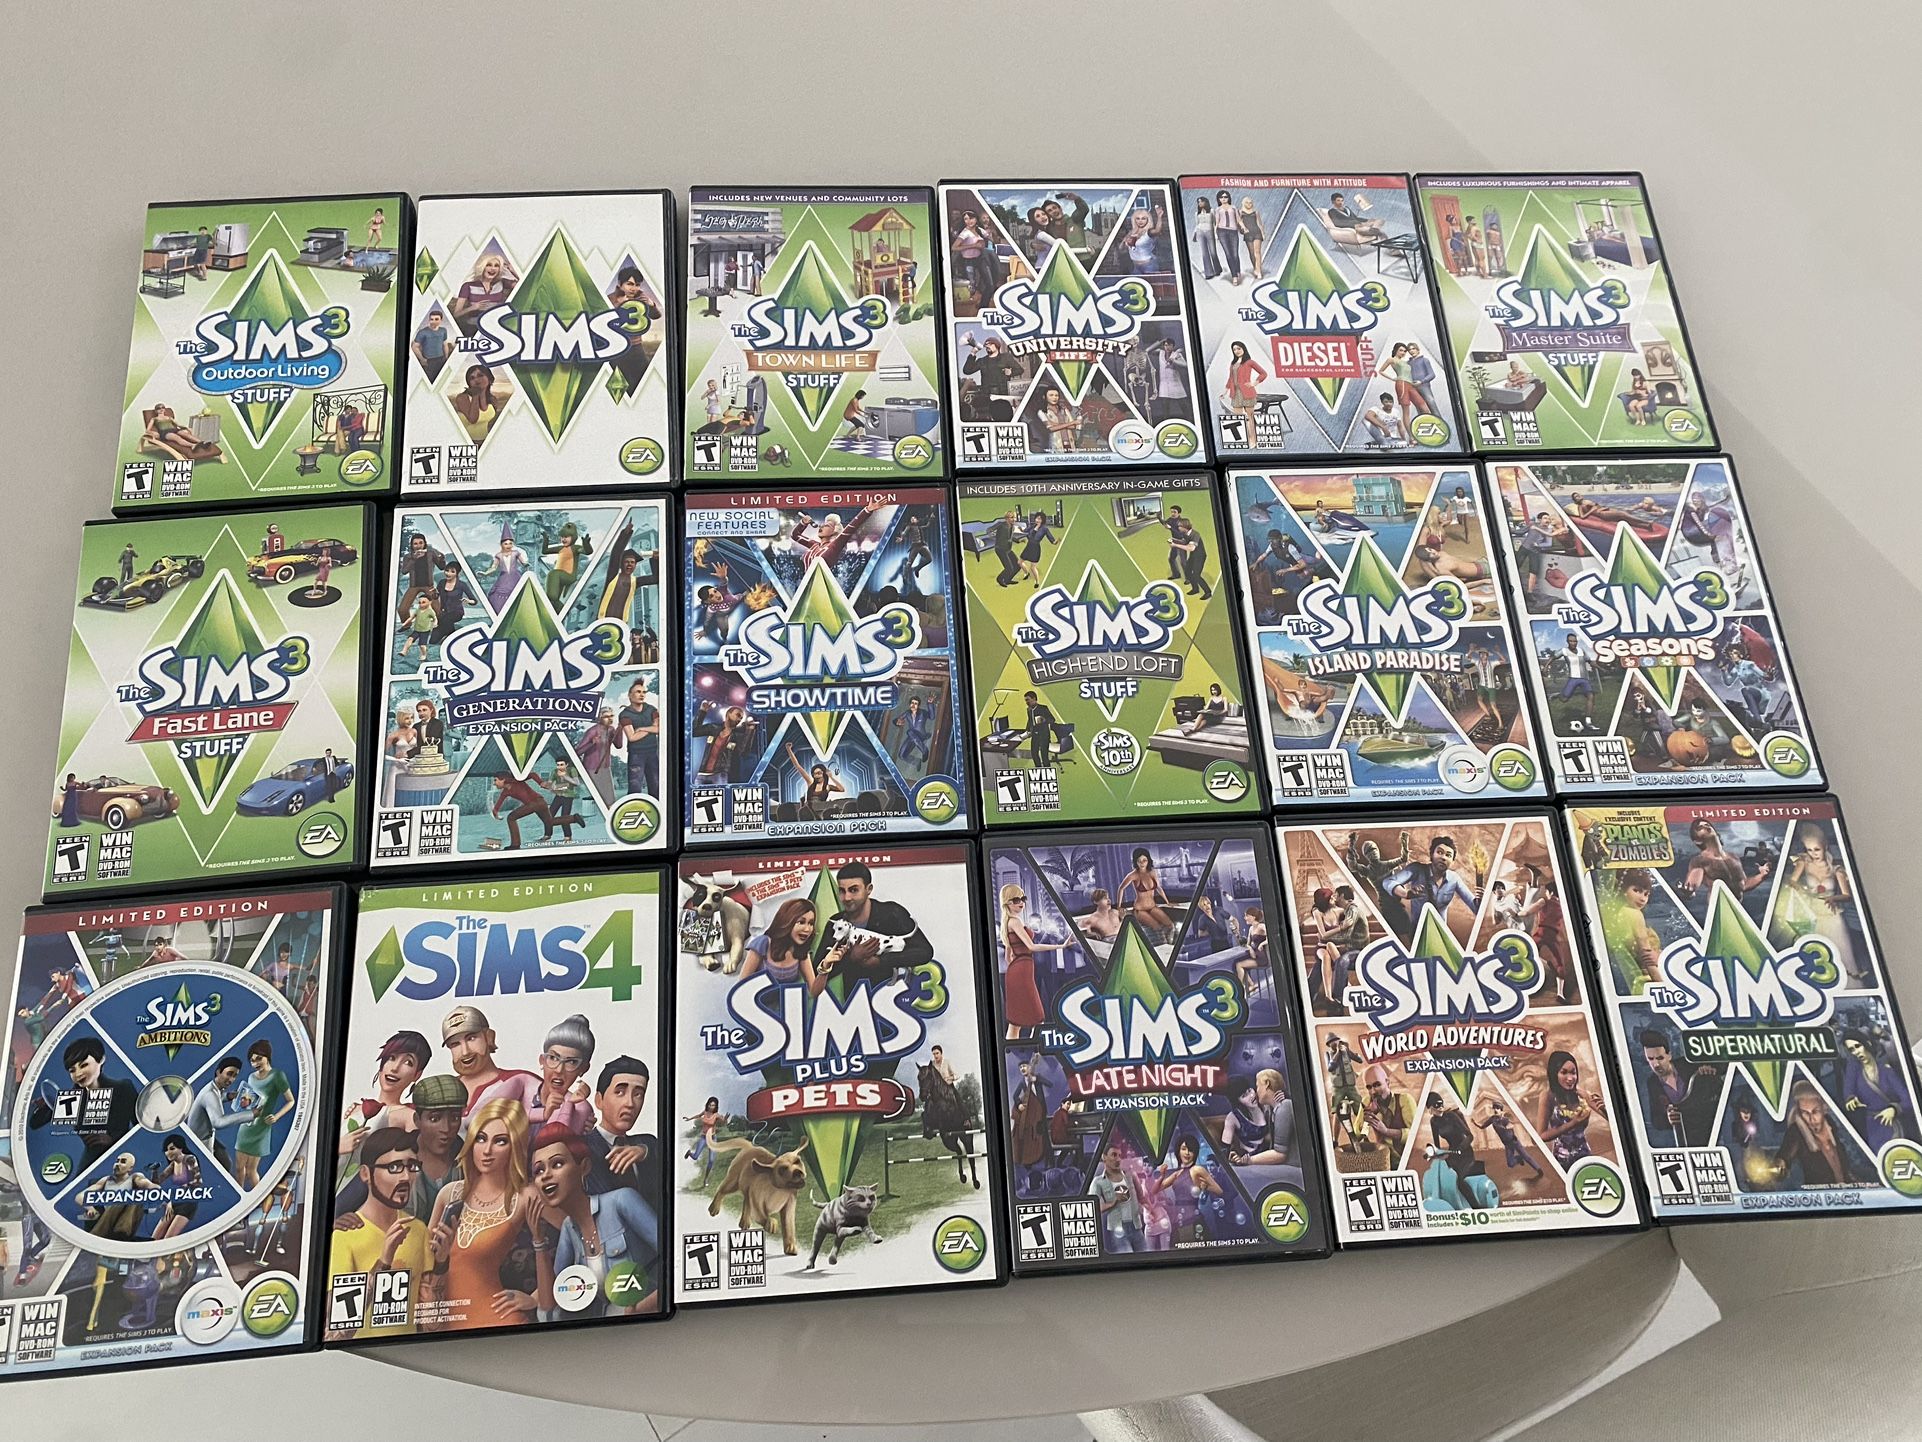 Sims 3 Expansion Packs And Stuff Packs